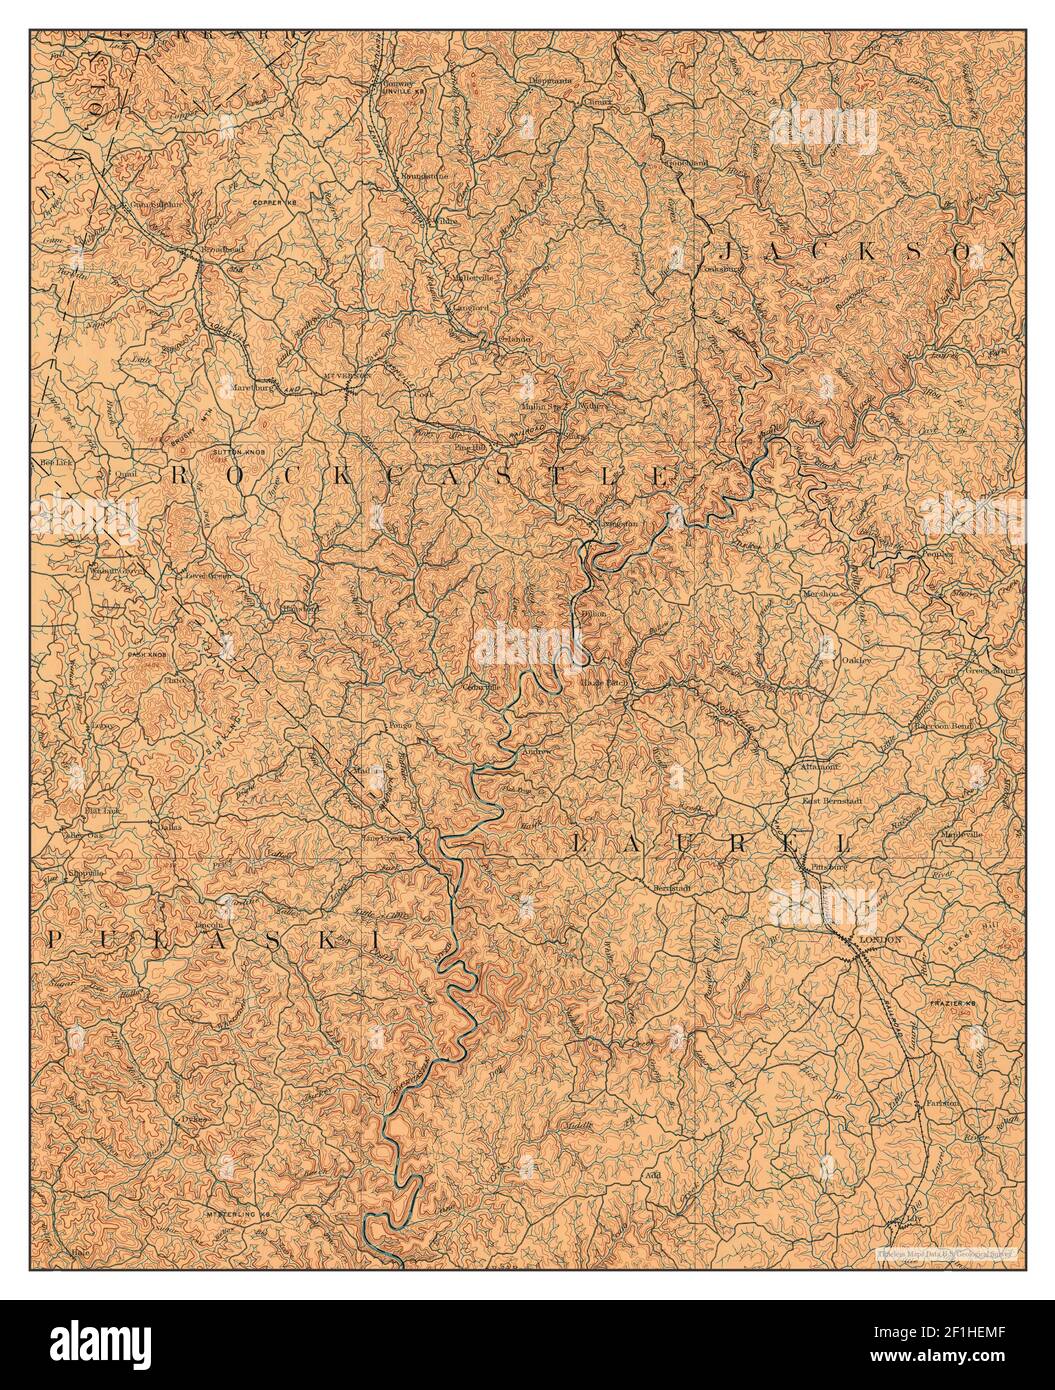 London, Kentucky, map 1893, 1:125000, United States of America by Timeless Maps, data U.S. Geological Survey Stock Photo